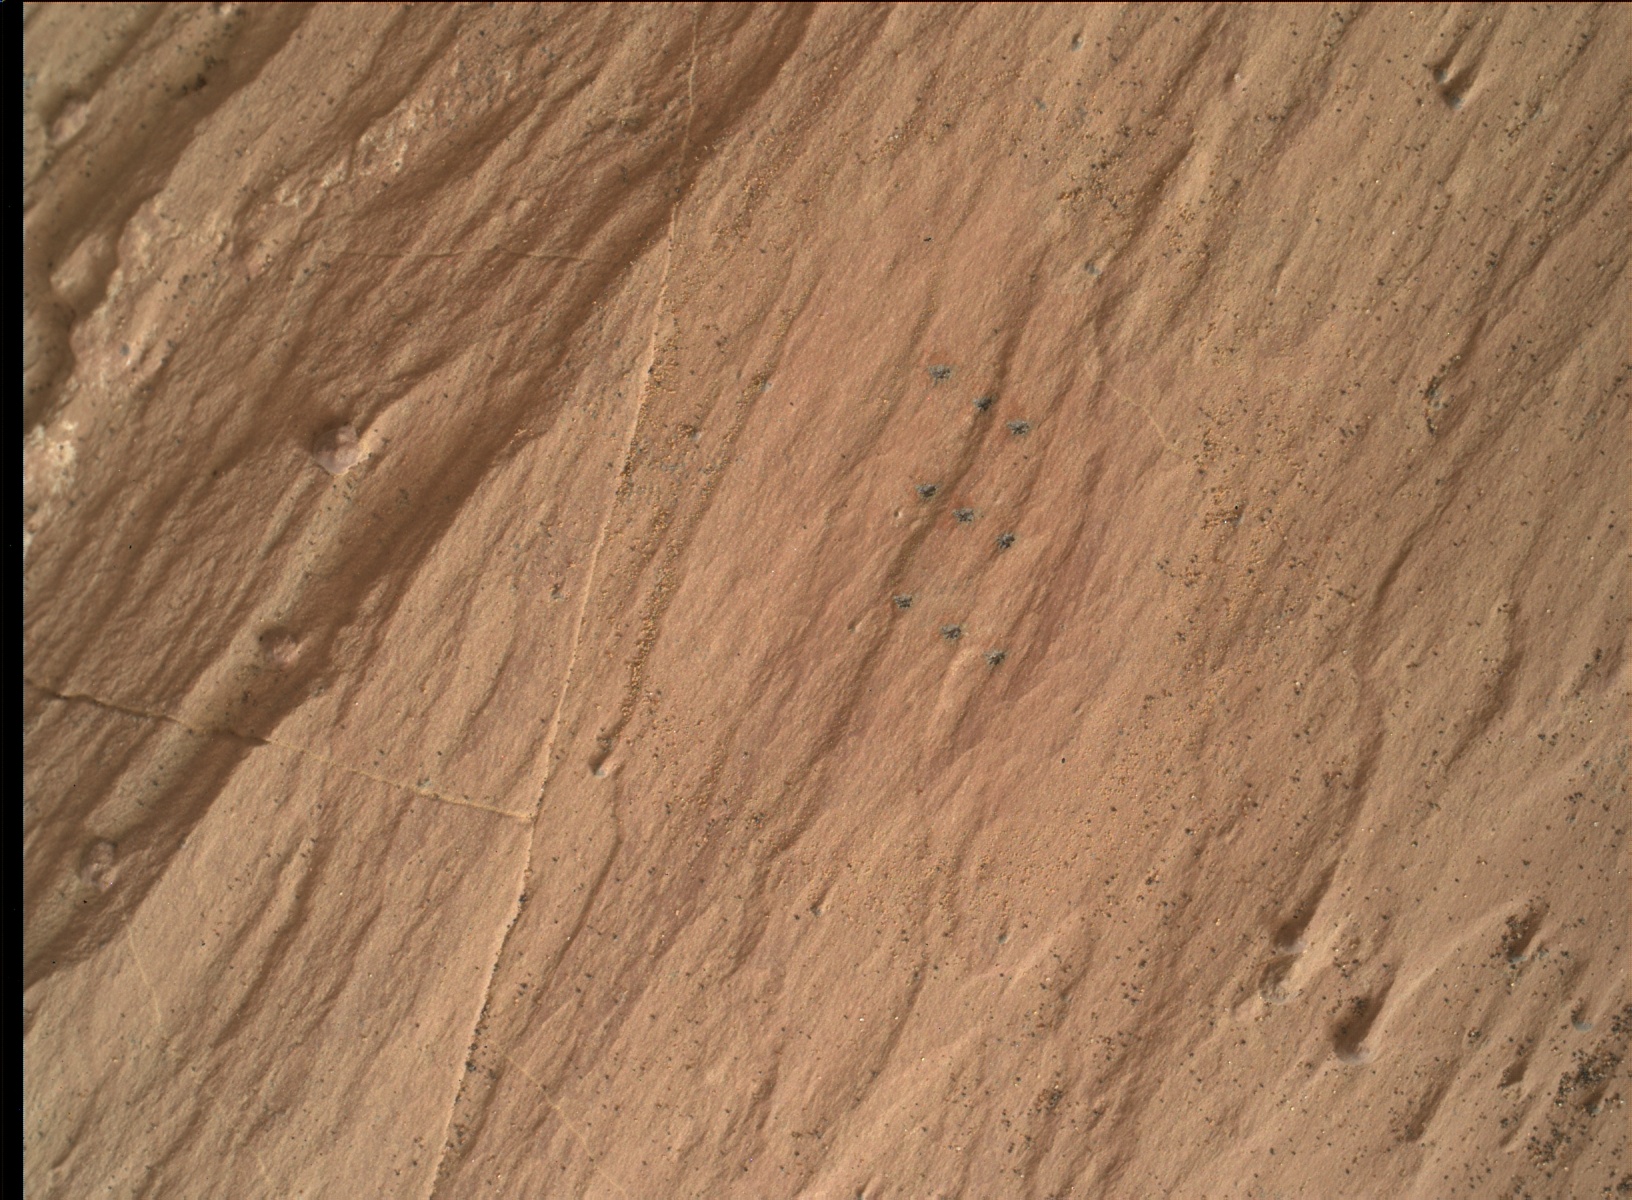 Nasa's Mars rover Curiosity acquired this image using its Mars Hand Lens Imager (MAHLI) on Sol 1609